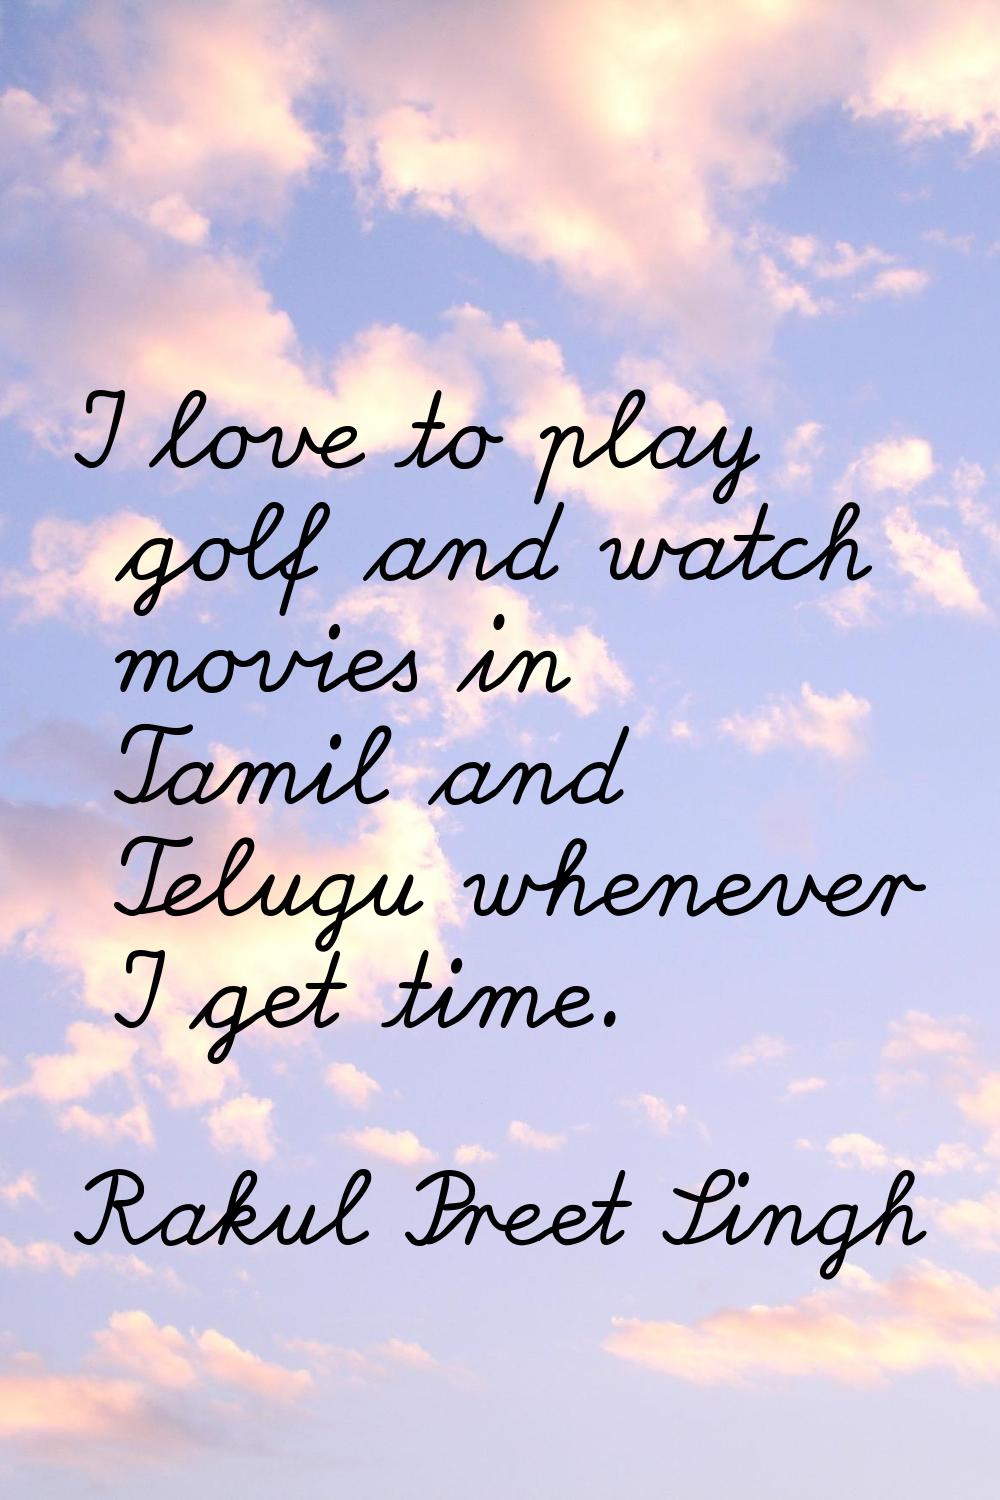 I love to play golf and watch movies in Tamil and Telugu whenever I get time.